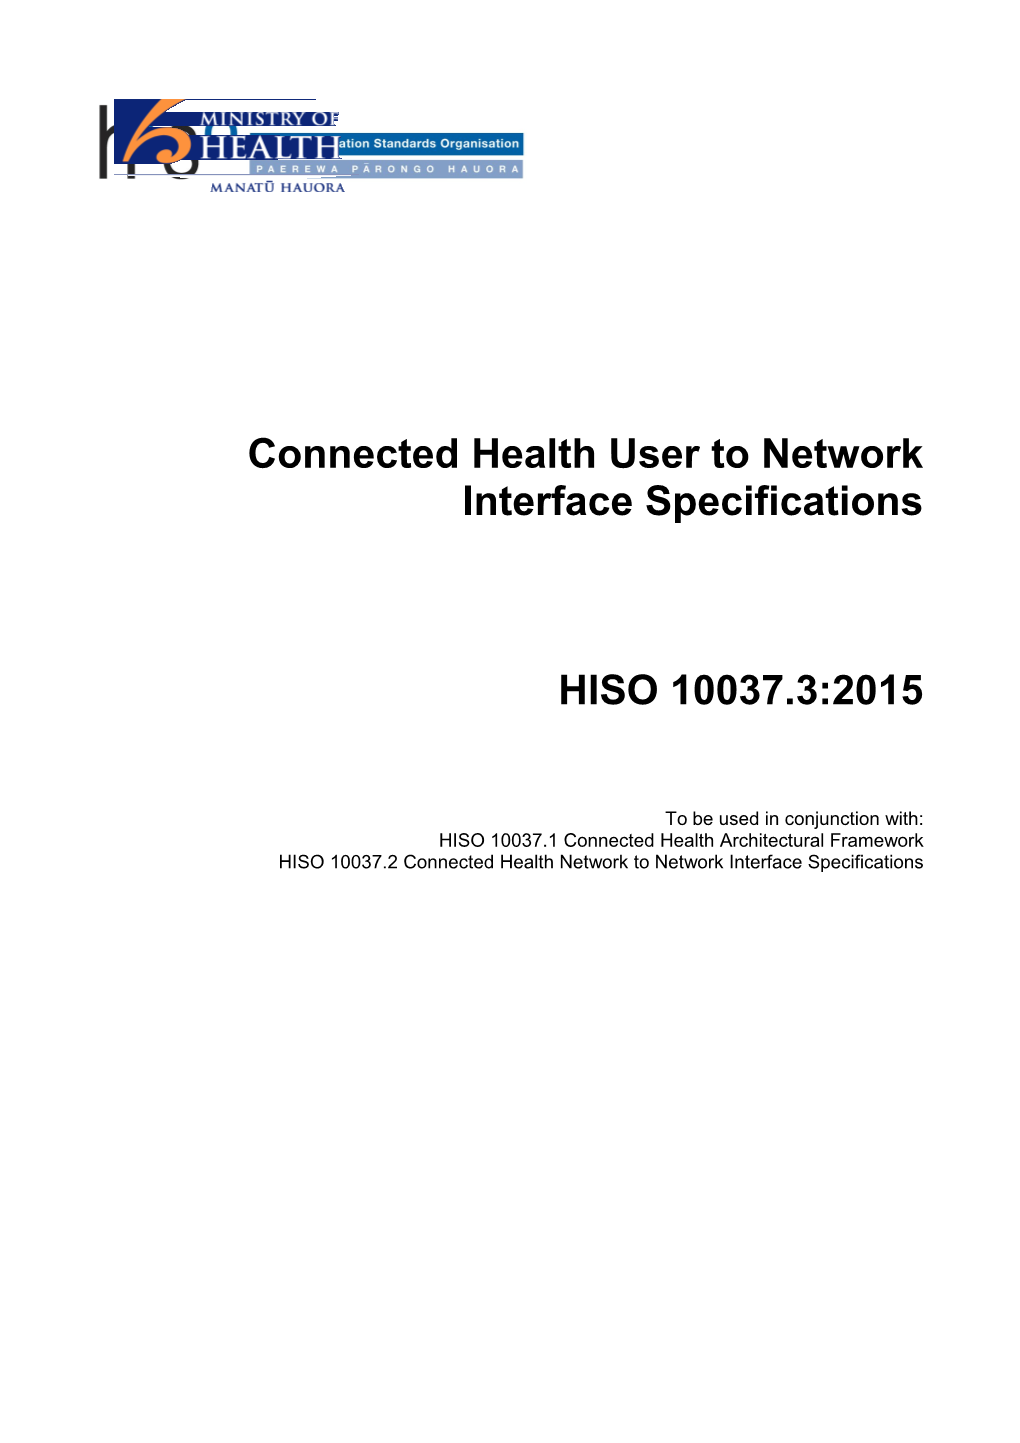 HISO 10037.3:2015 Connected Health UNI Specifications